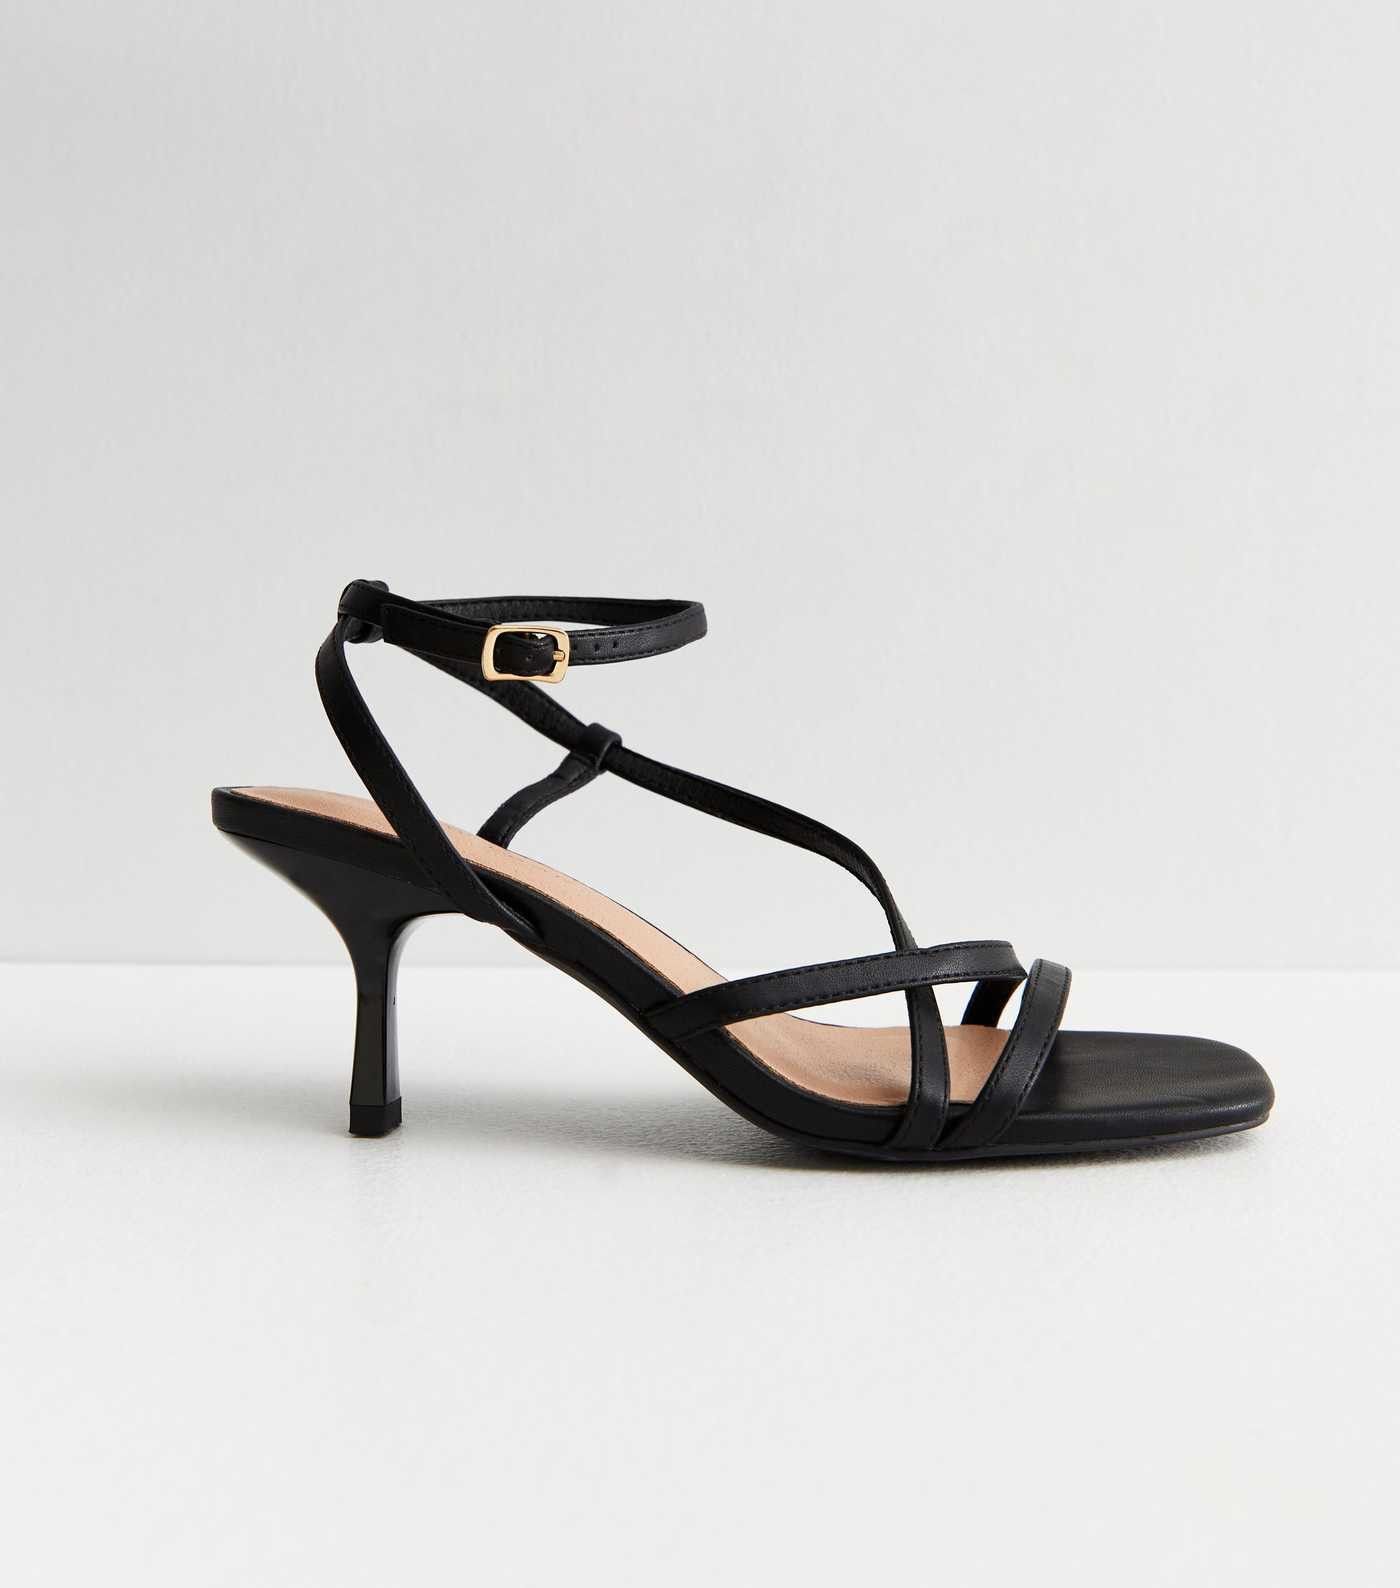 Black Leather-Look Strappy Stiletto Kitten Heel Sandals
						
						Add to Saved Items
						Rem... | New Look (UK)